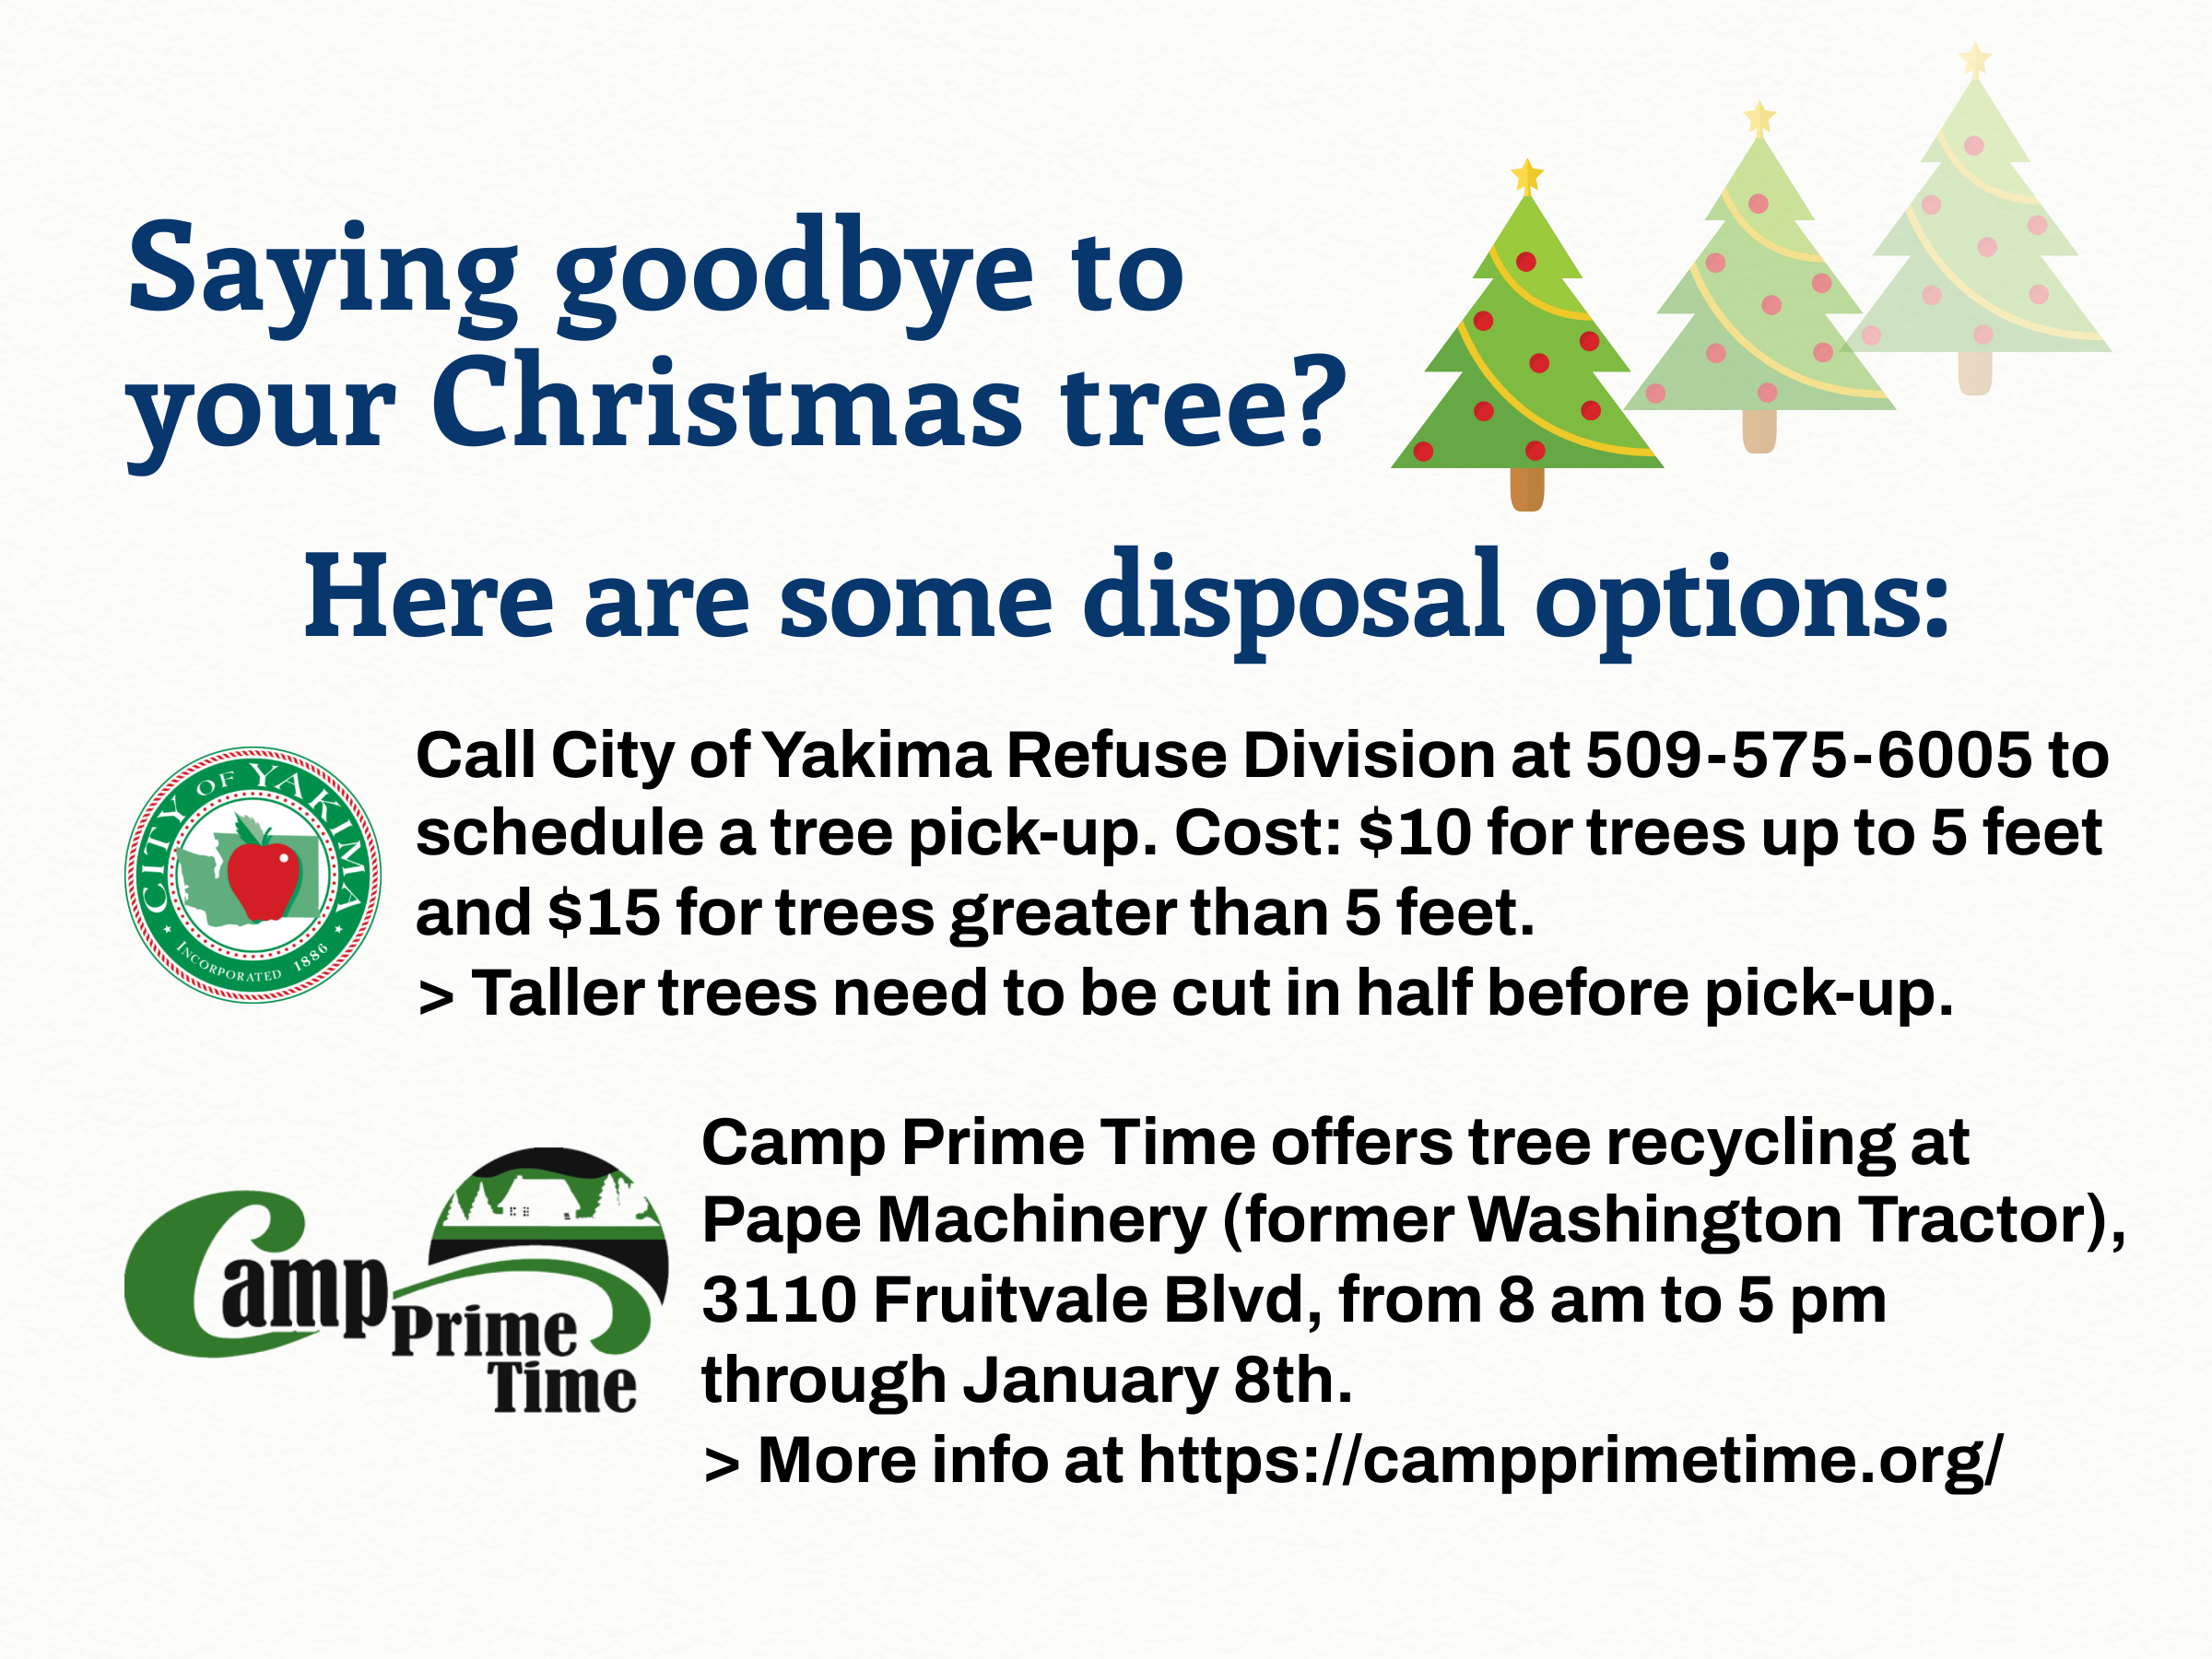 Options Available for Christmas Tree Disposal